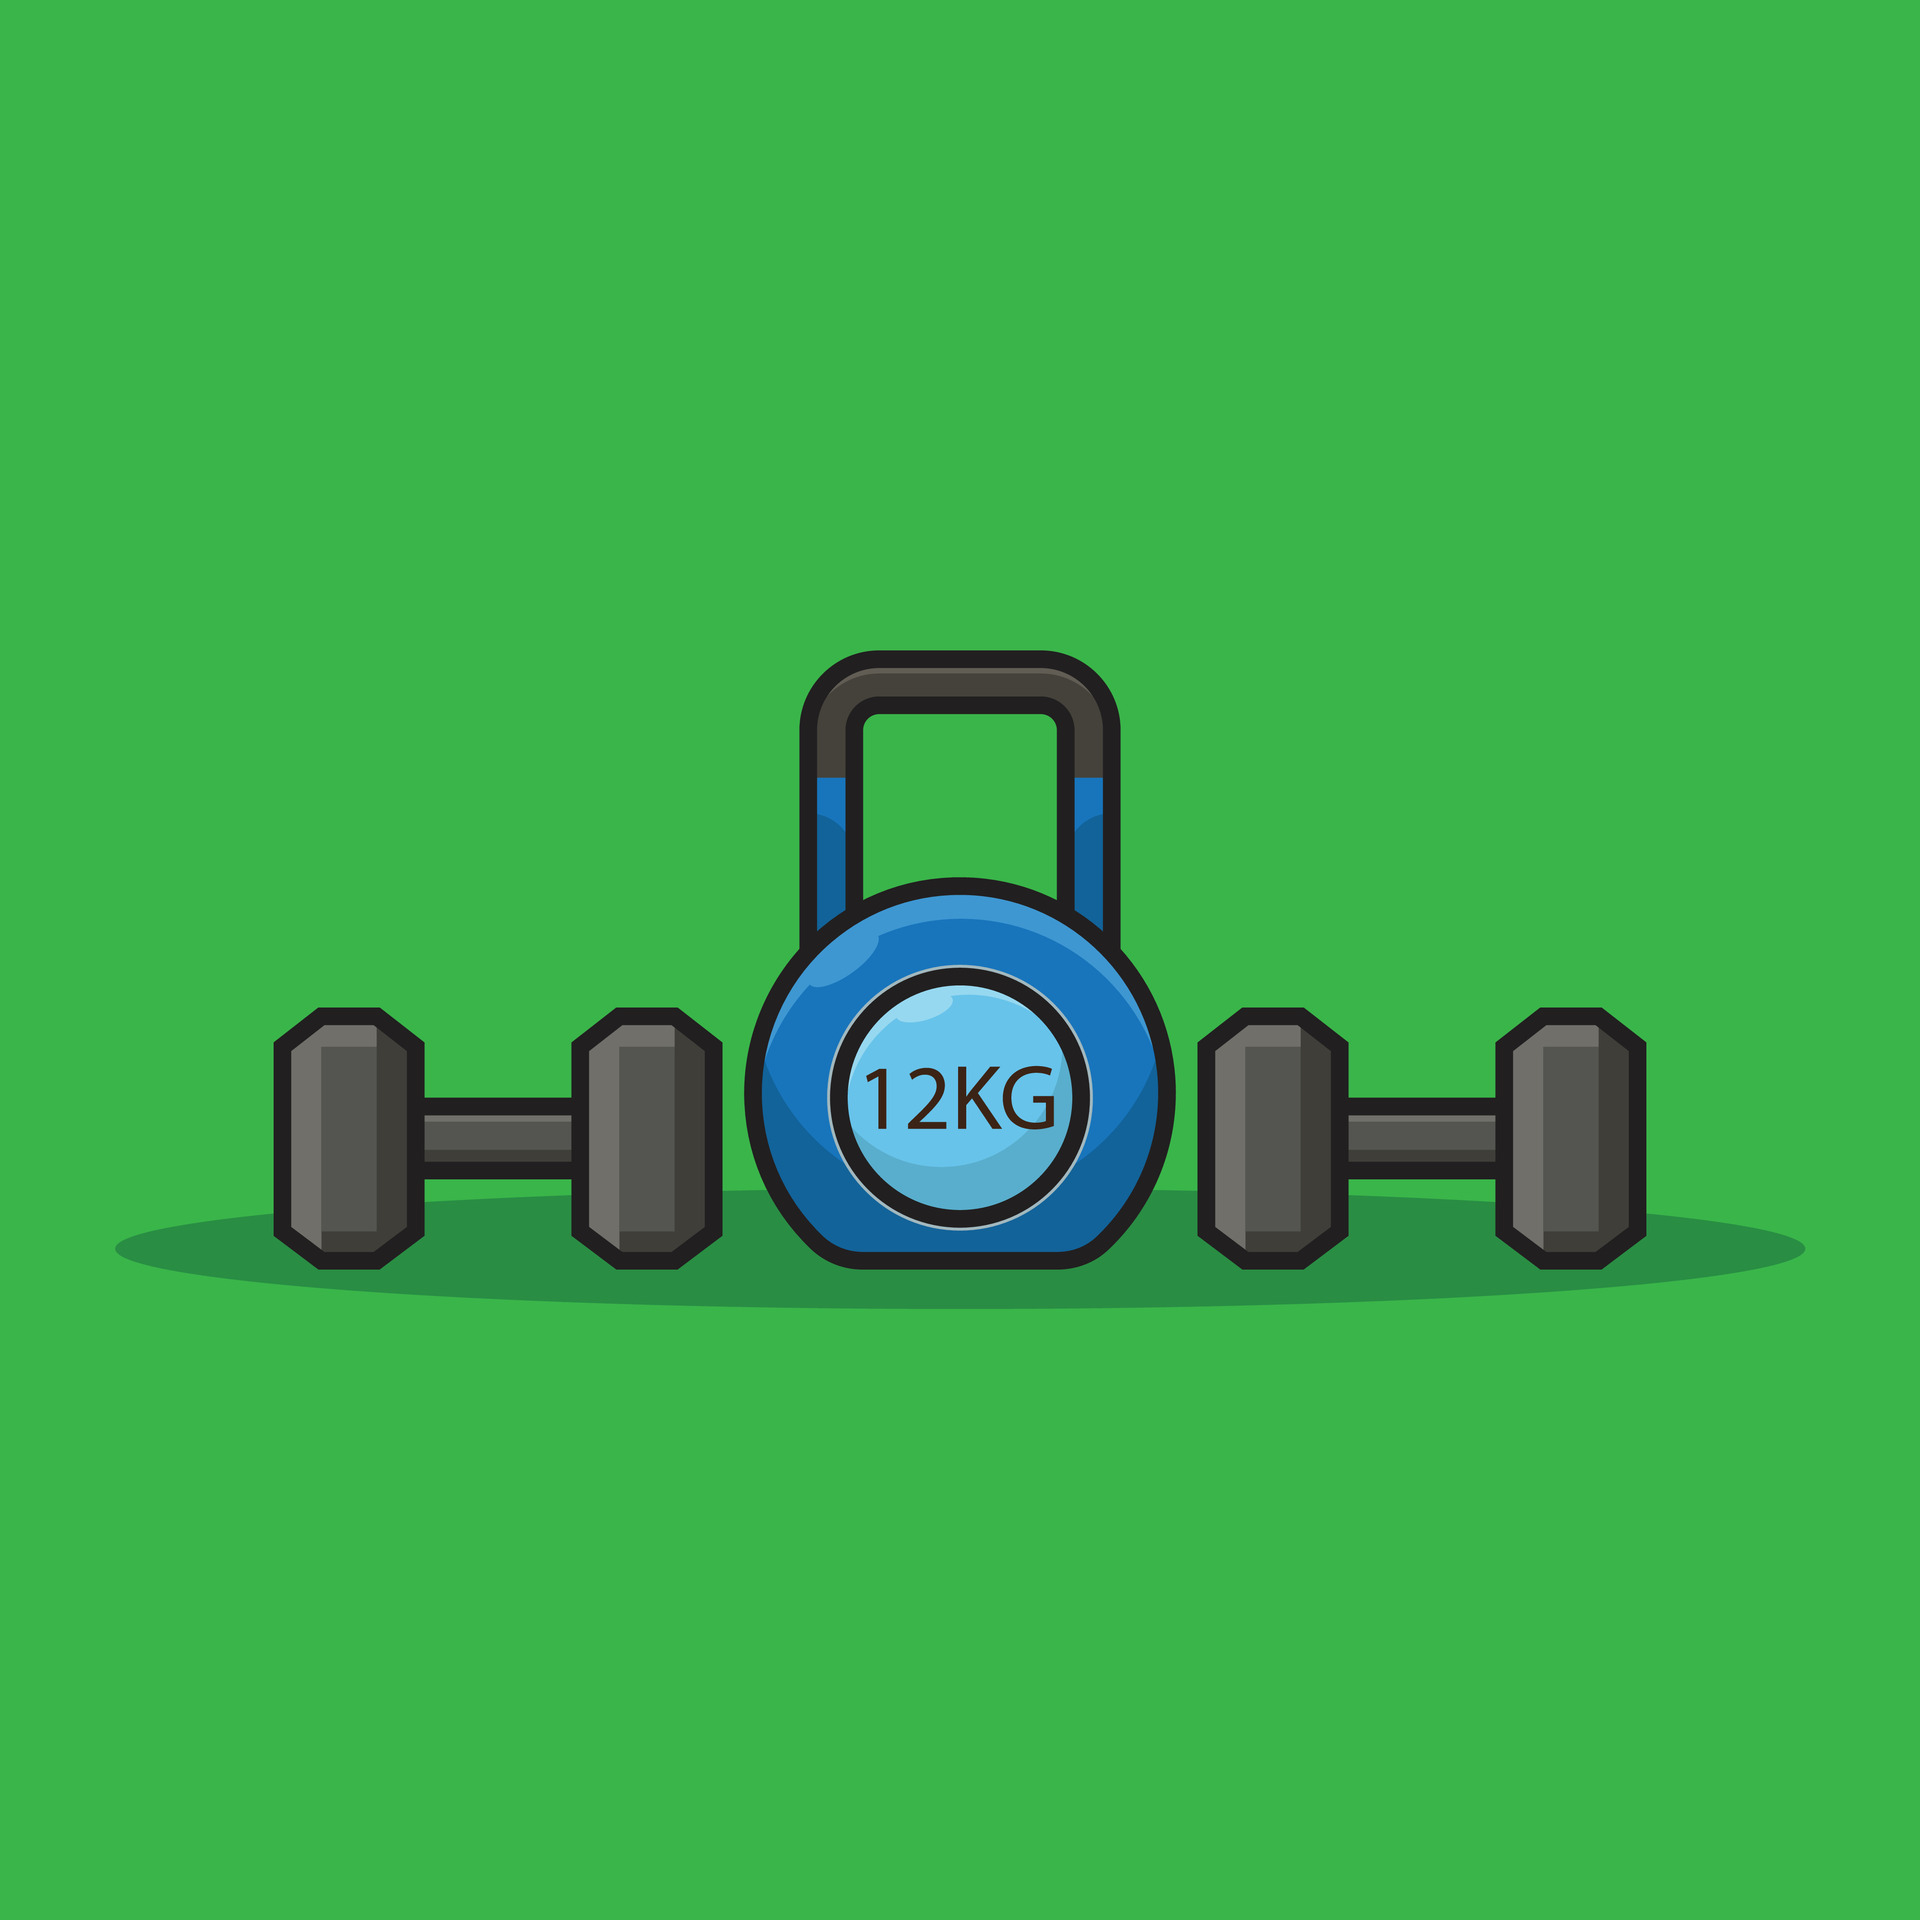 https://static.vecteezy.com/system/resources/previews/025/874/176/original/workout-equipment-isolated-gym-accessories-workout-stuff-cartoon-illustration-of-fitness-equipment-flat-illustration-isolated-vector.jpg